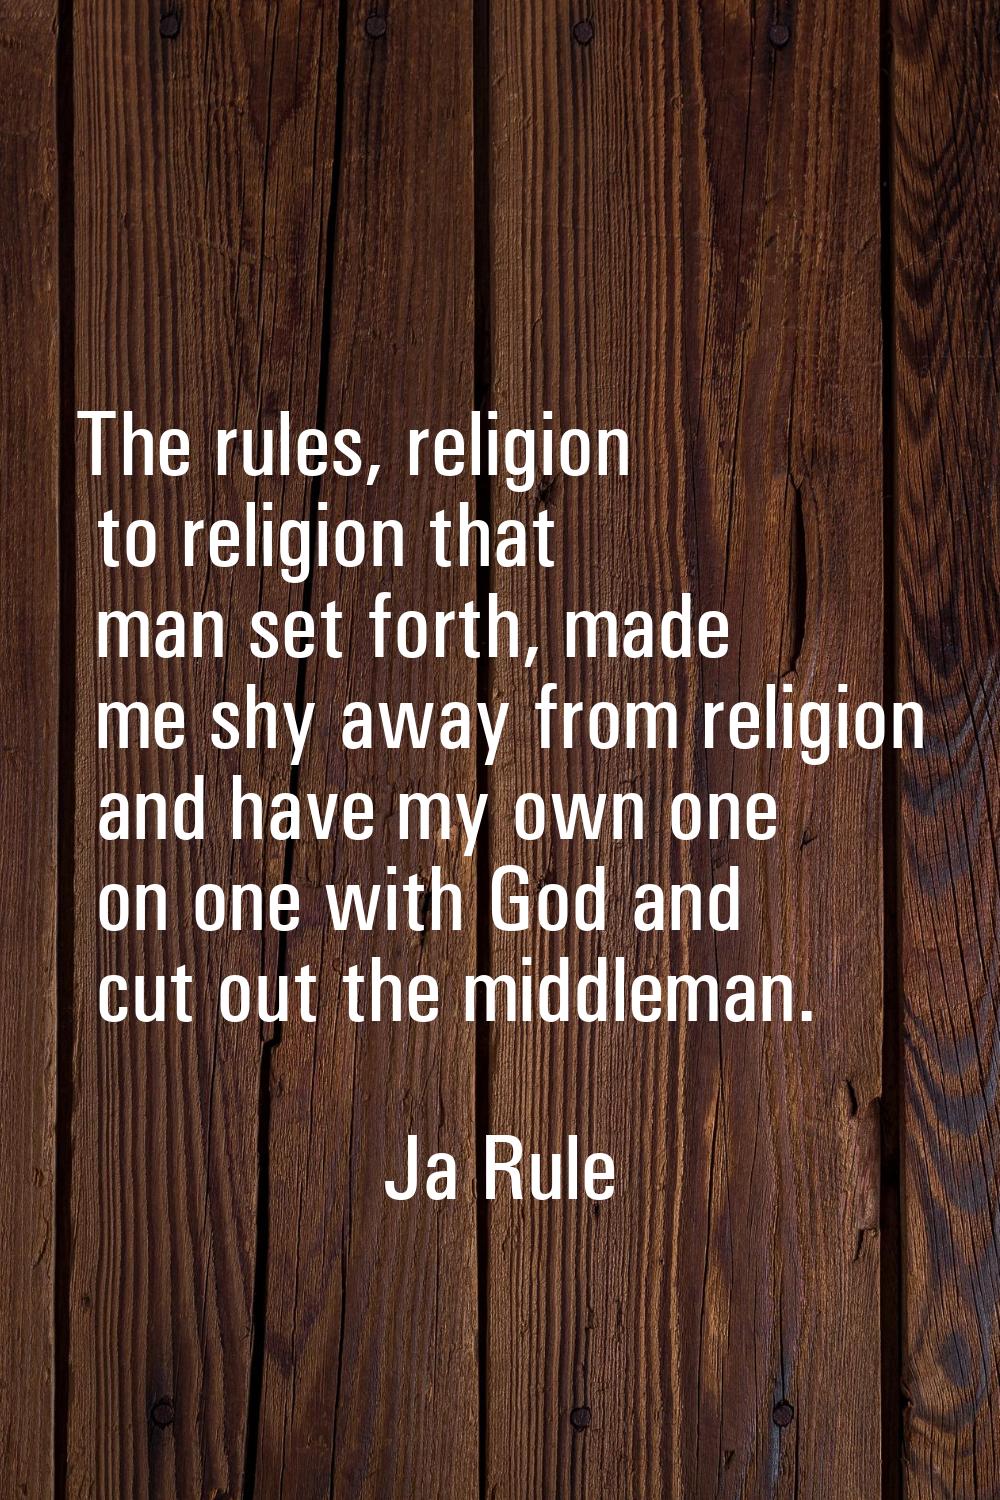 The rules, religion to religion that man set forth, made me shy away from religion and have my own 